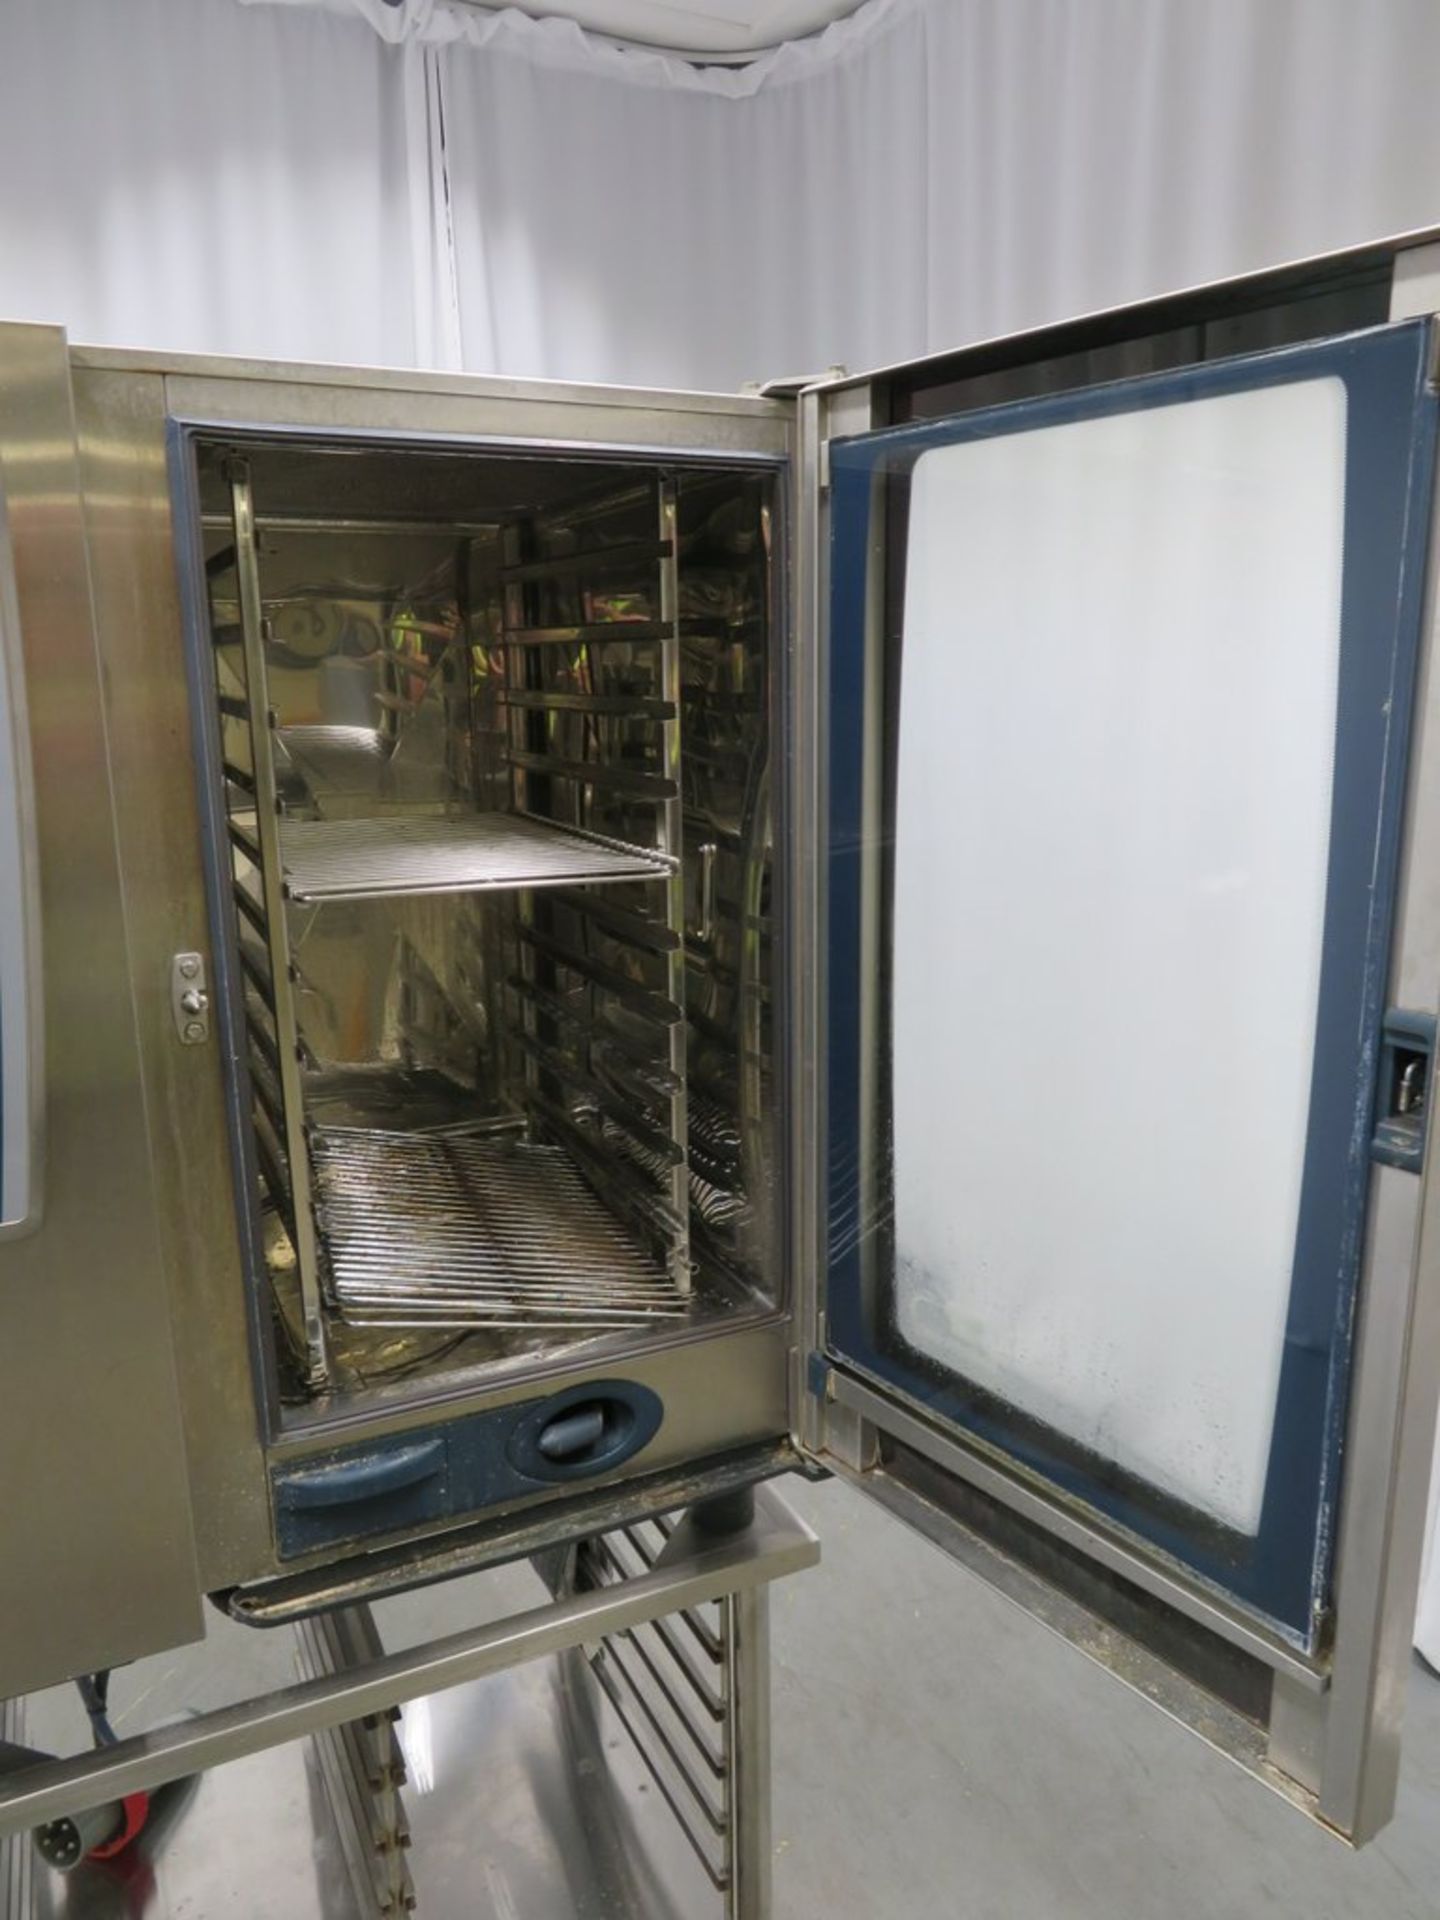 Rational SCC WE 101 5 senses 10 grid combi oven, 3 phase electric - Image 5 of 16